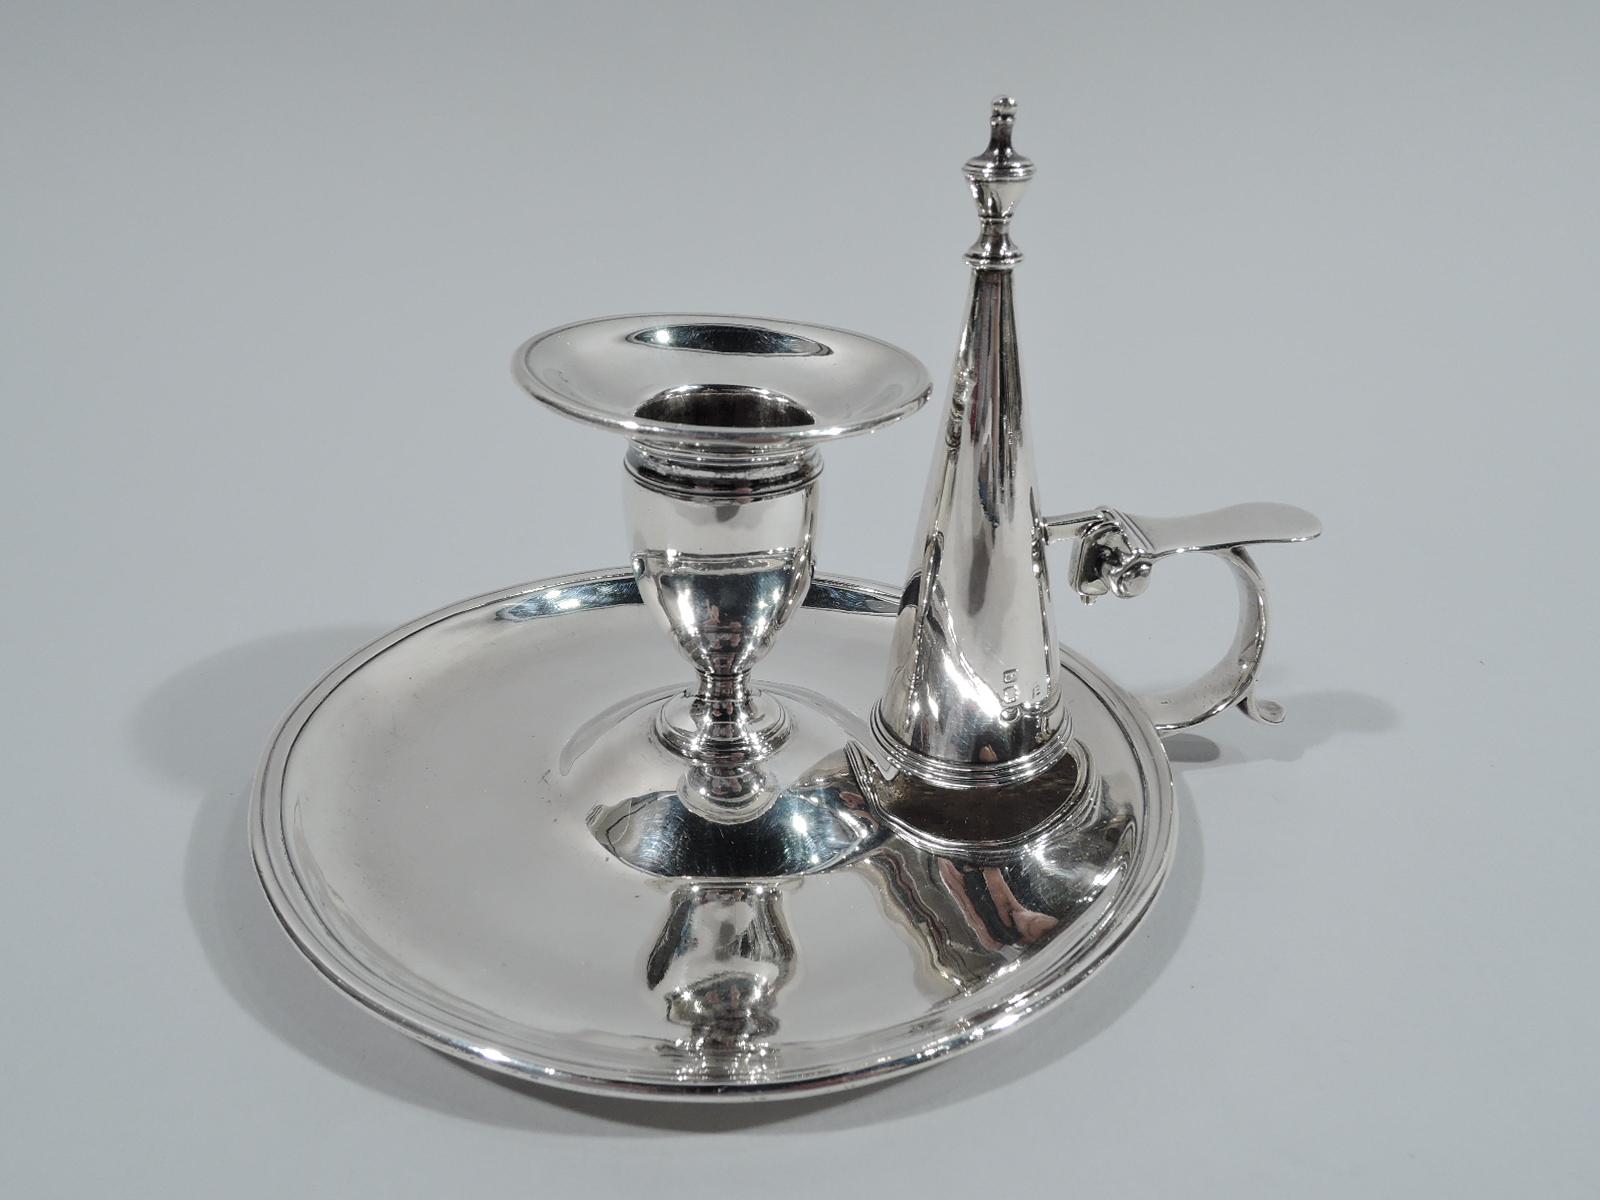 English Georgian neoclassical sterling silver chamberstick, 1791. Central ovoid socket on raised foot mounted to raised center of round and molded saucer. Conical snuffer with vasiform finial and bracket mount set in capped c-scroll handle. Fully